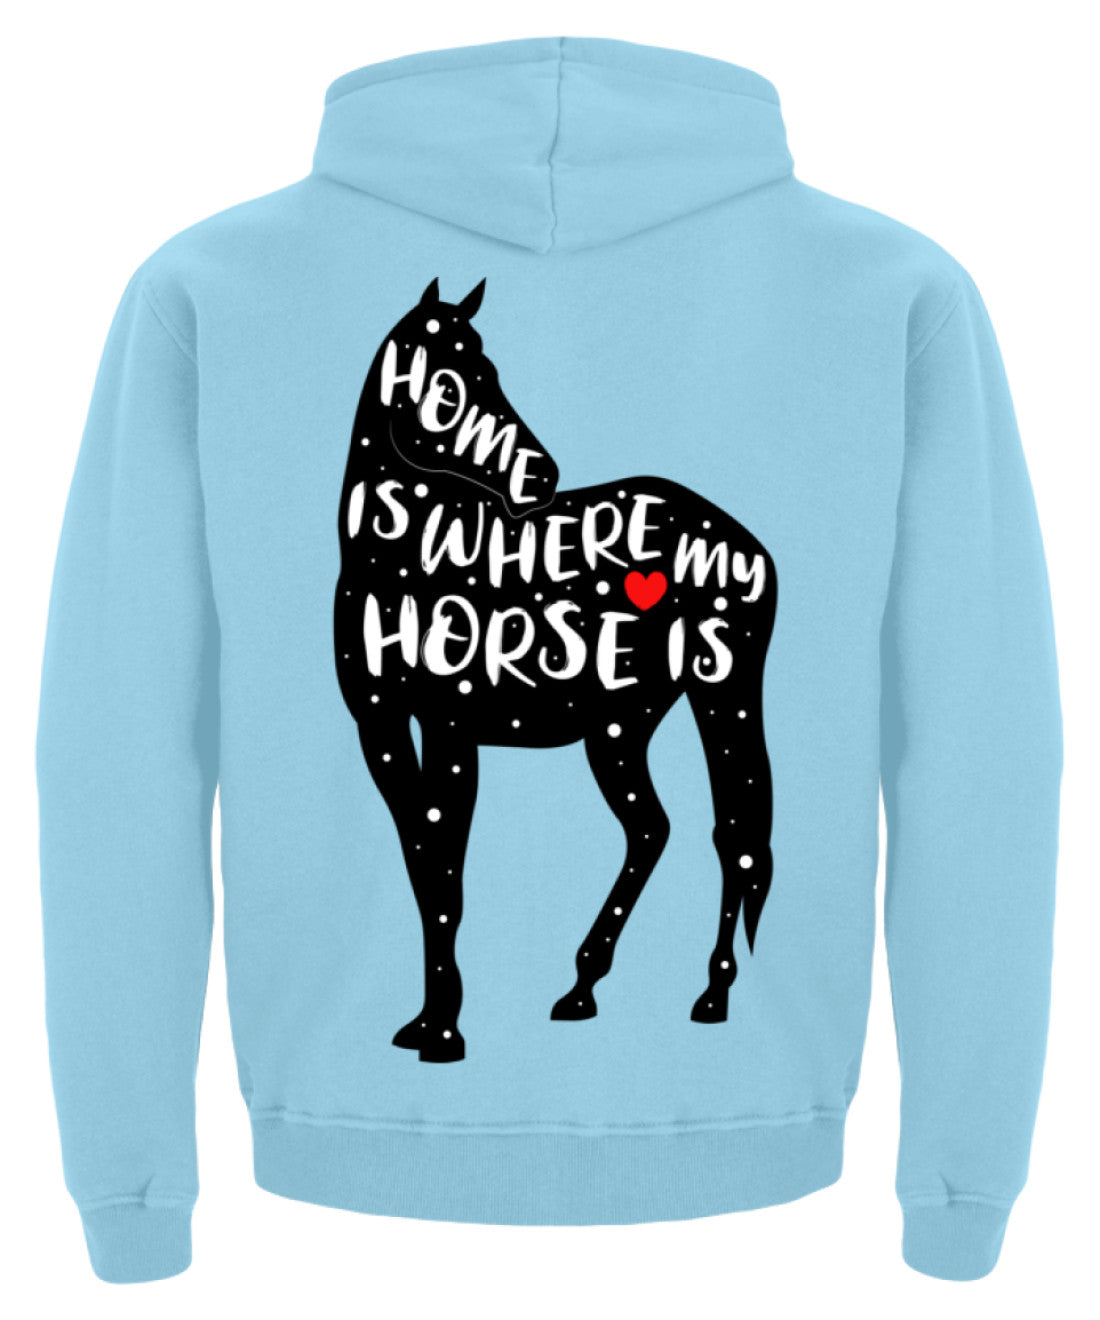 Zeigt funny adorable horse saying kinder hoodie in Farbe Baby Pink